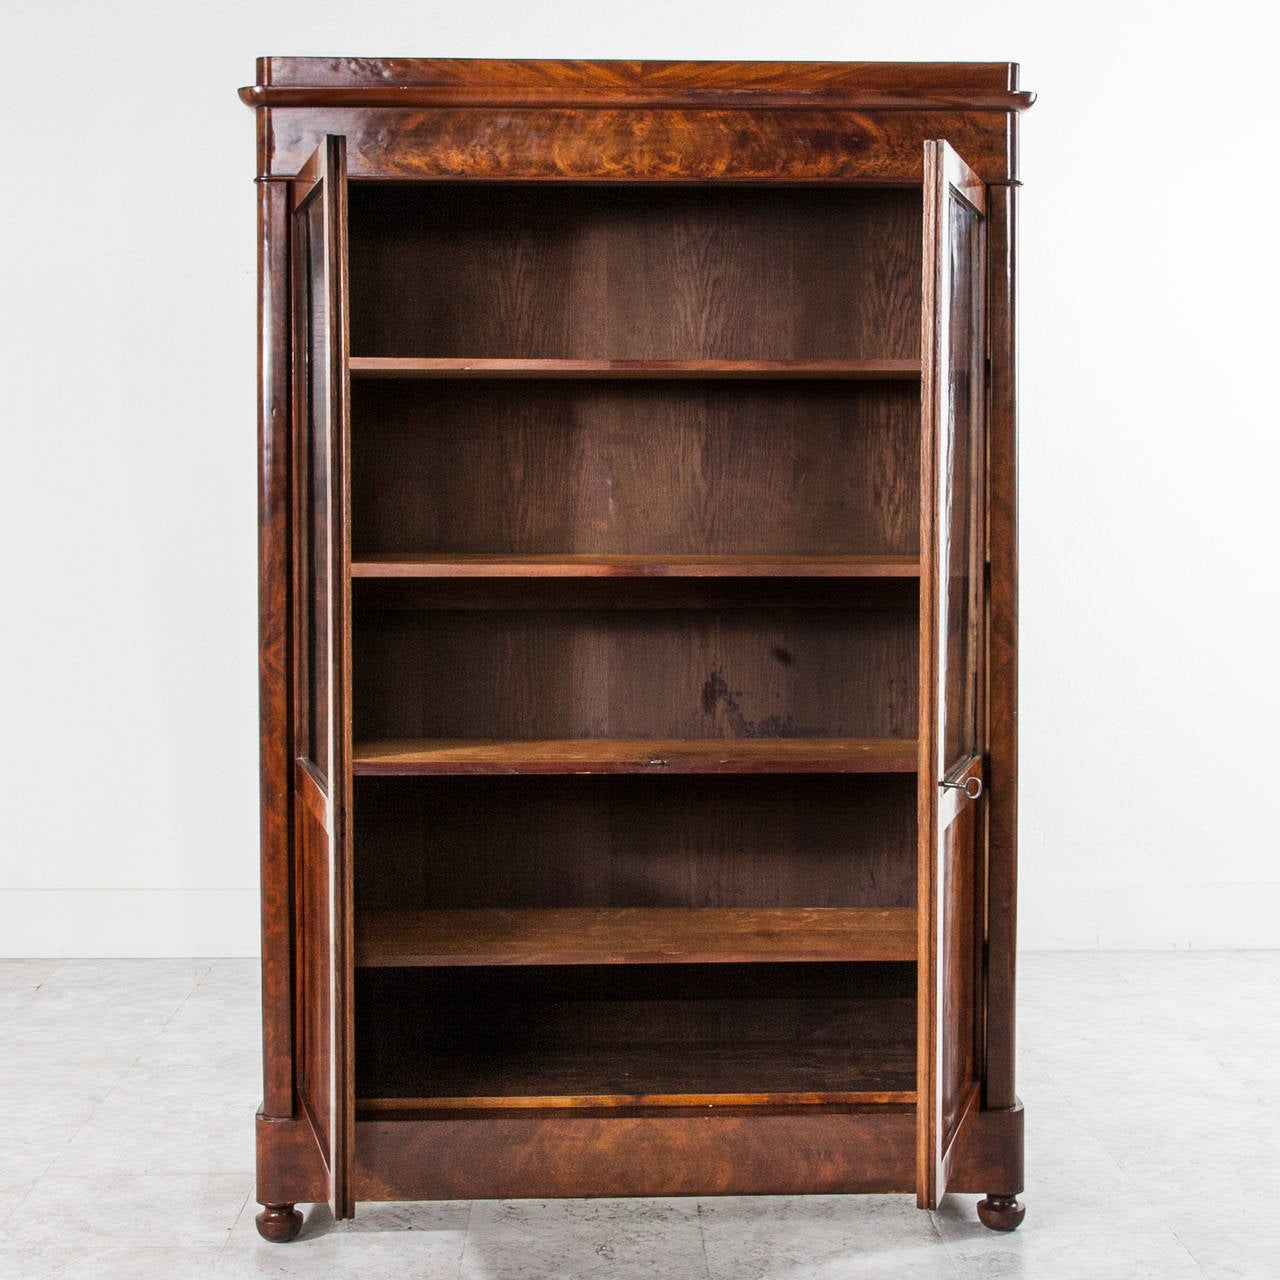 French Period Louis Philippe Flamed Mahogany Bookcase or Vitrine Cabinet